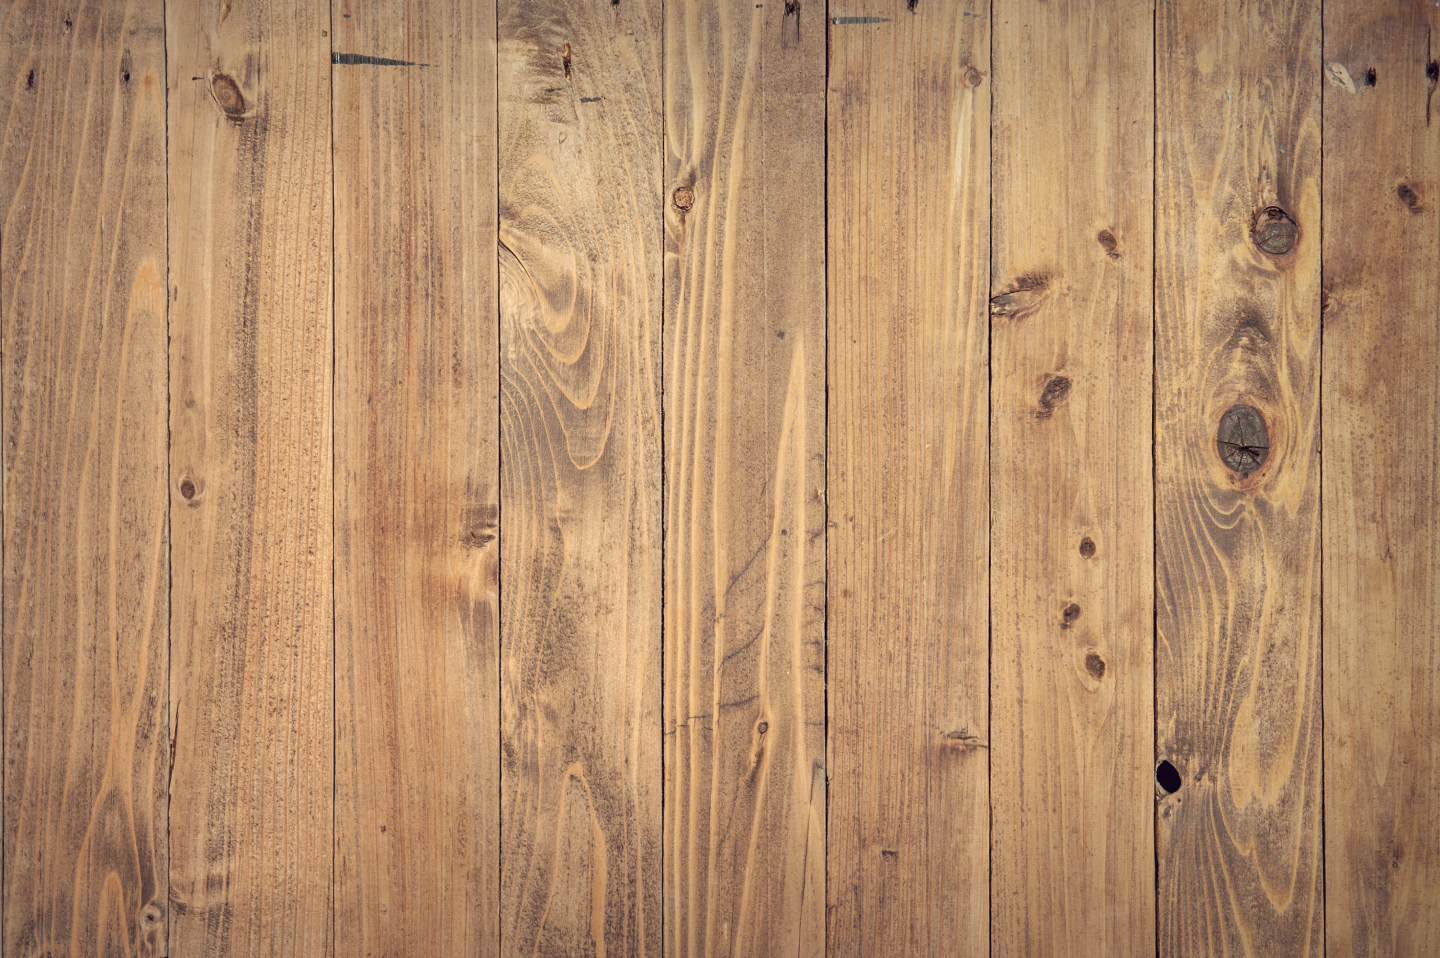 Solid Wood Vs Engineered Wood: Find What’s Best For You!